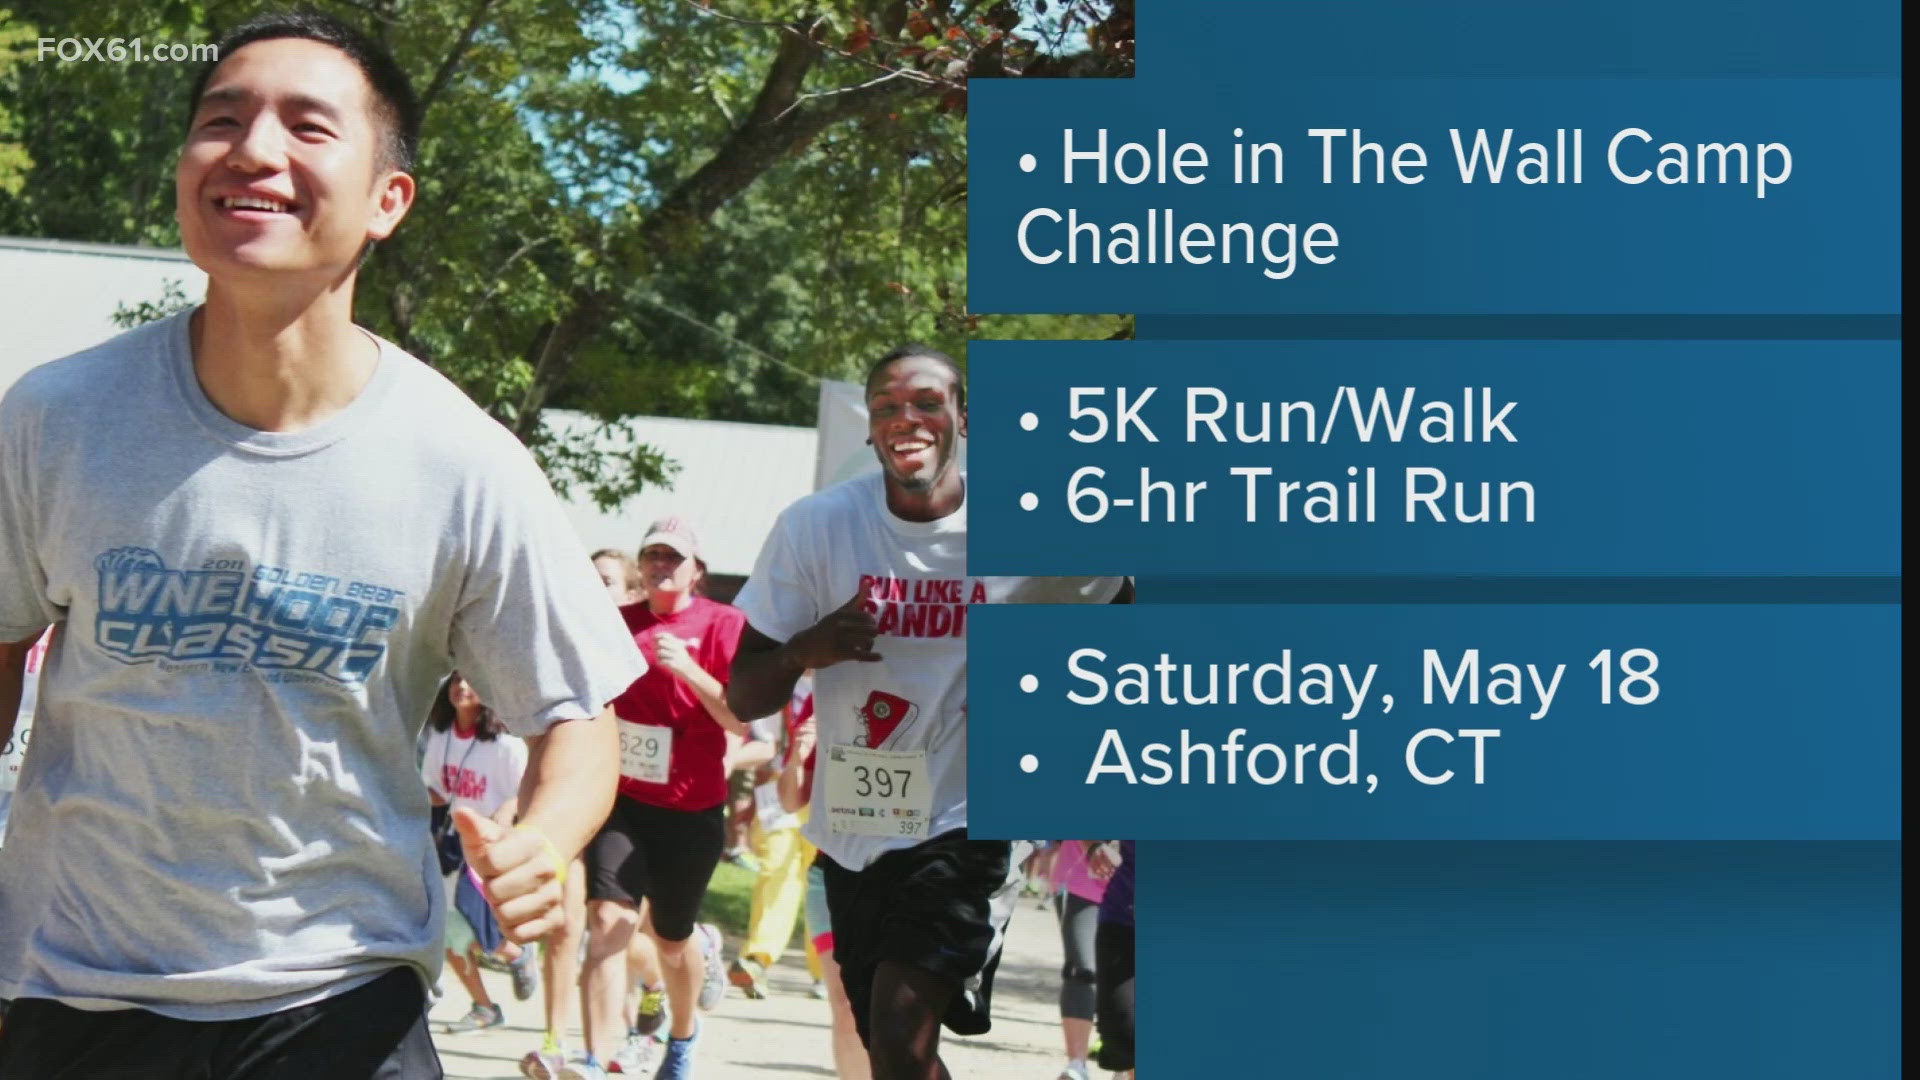 Calling all runners and walkers! Make your miles court at the 16th Annual Camp Challenge! This event finishes with a fun festival with food, fun, and live music.